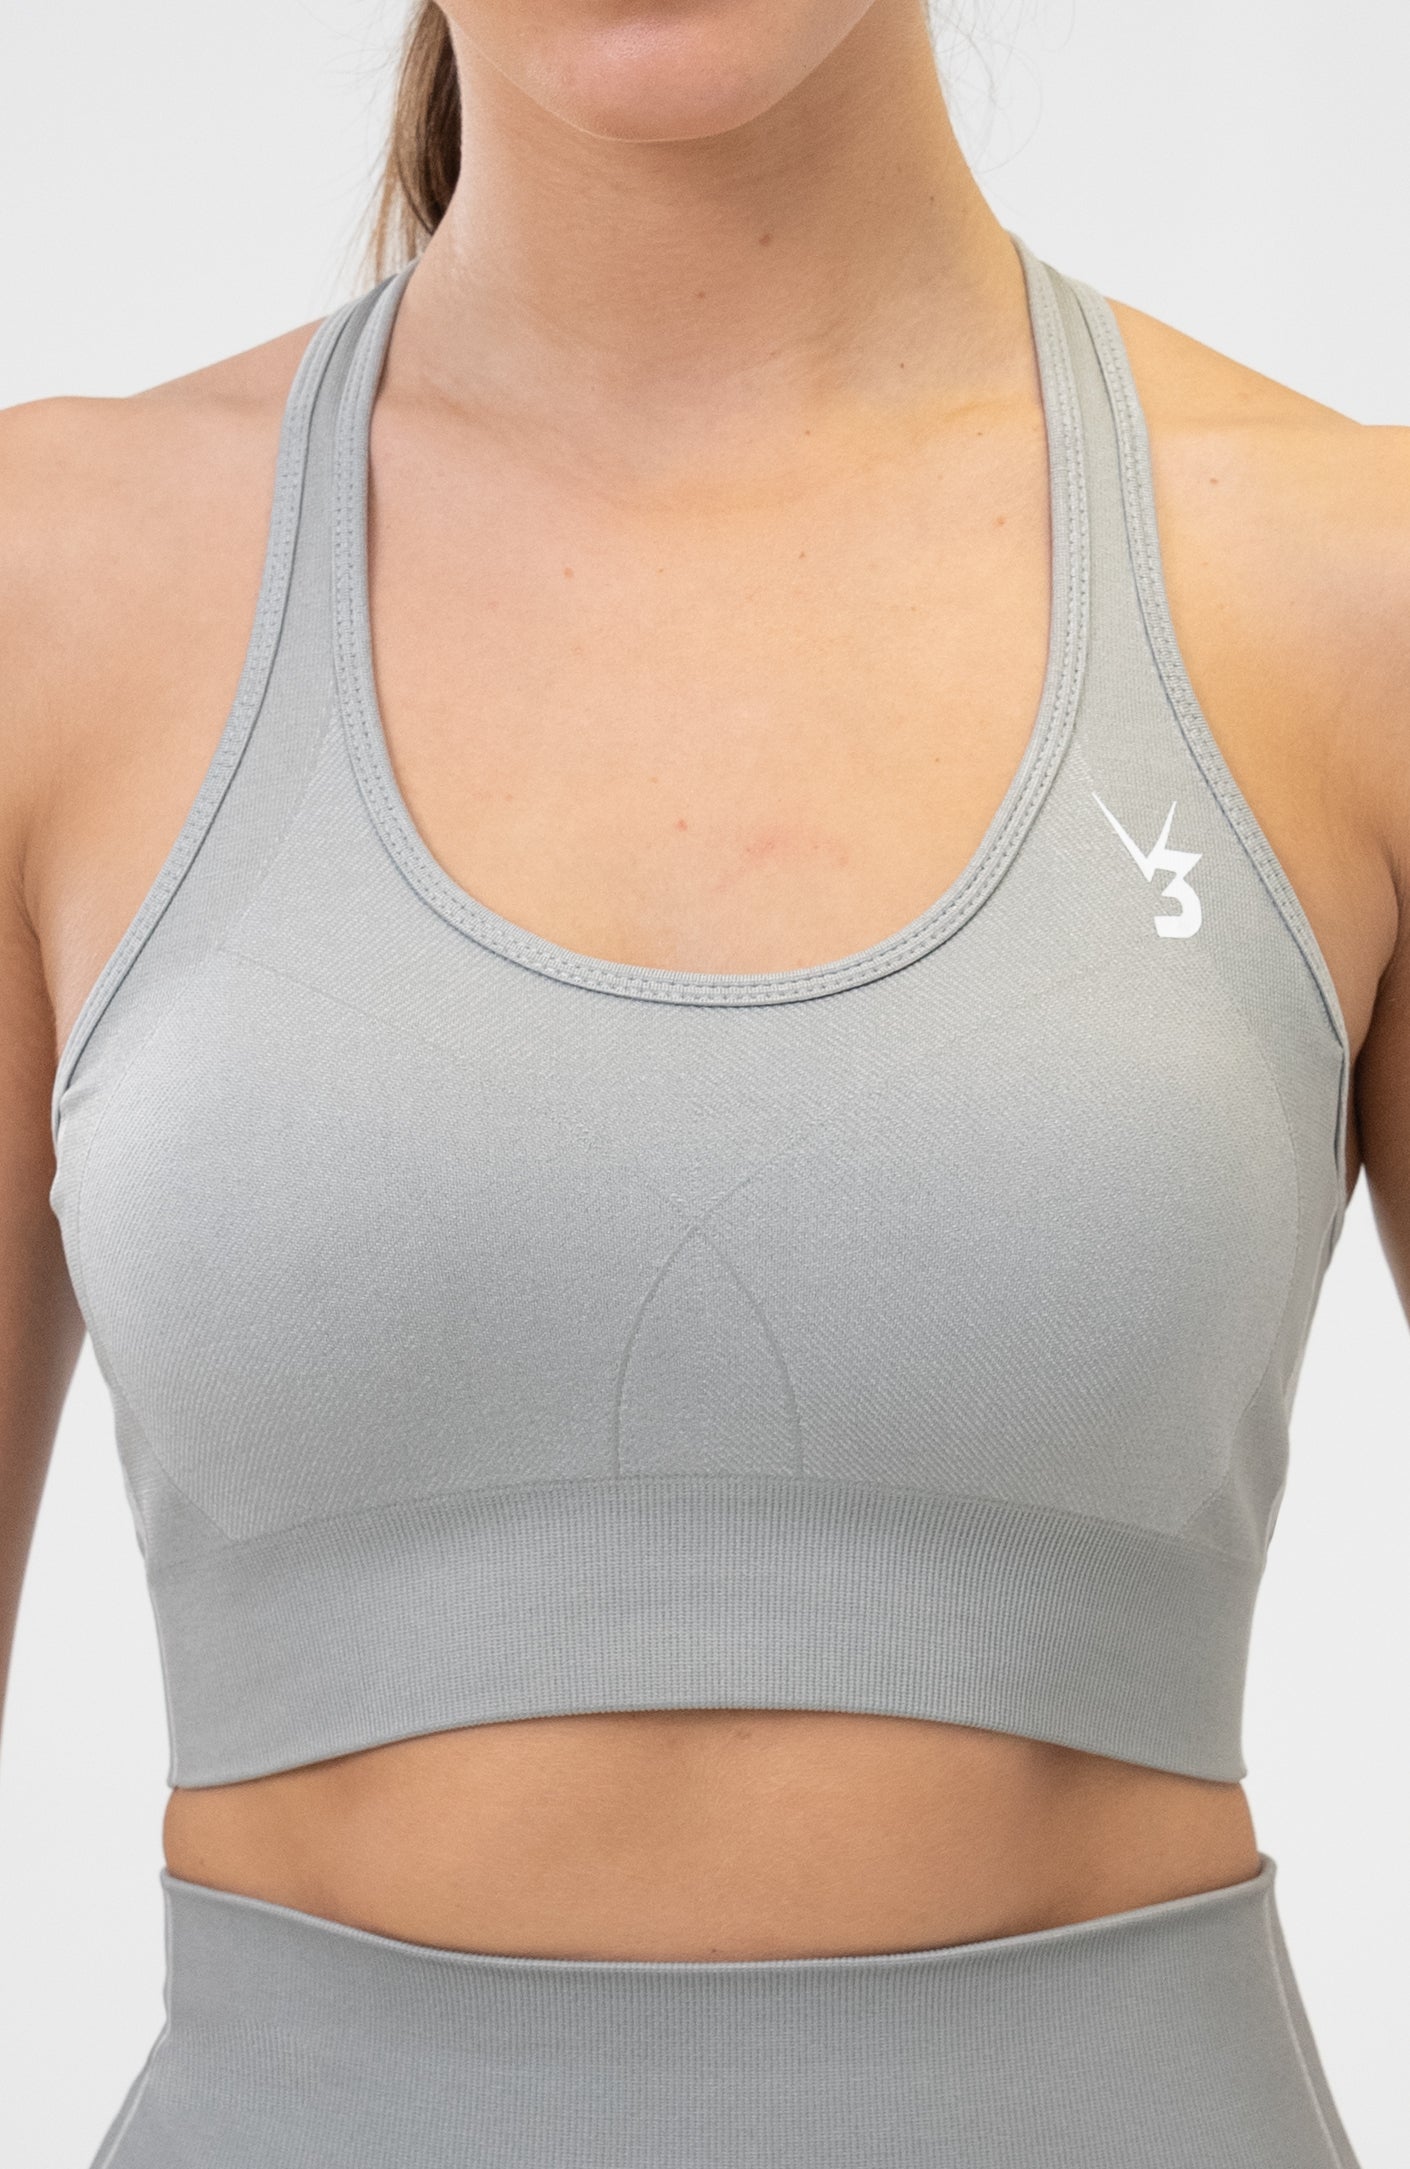 V3 Apparel Women's seamless Unity training sports bra in grey with removable padded cups and strap for gym workouts training, Running, yoga, bodybuilding and bikini fitness.